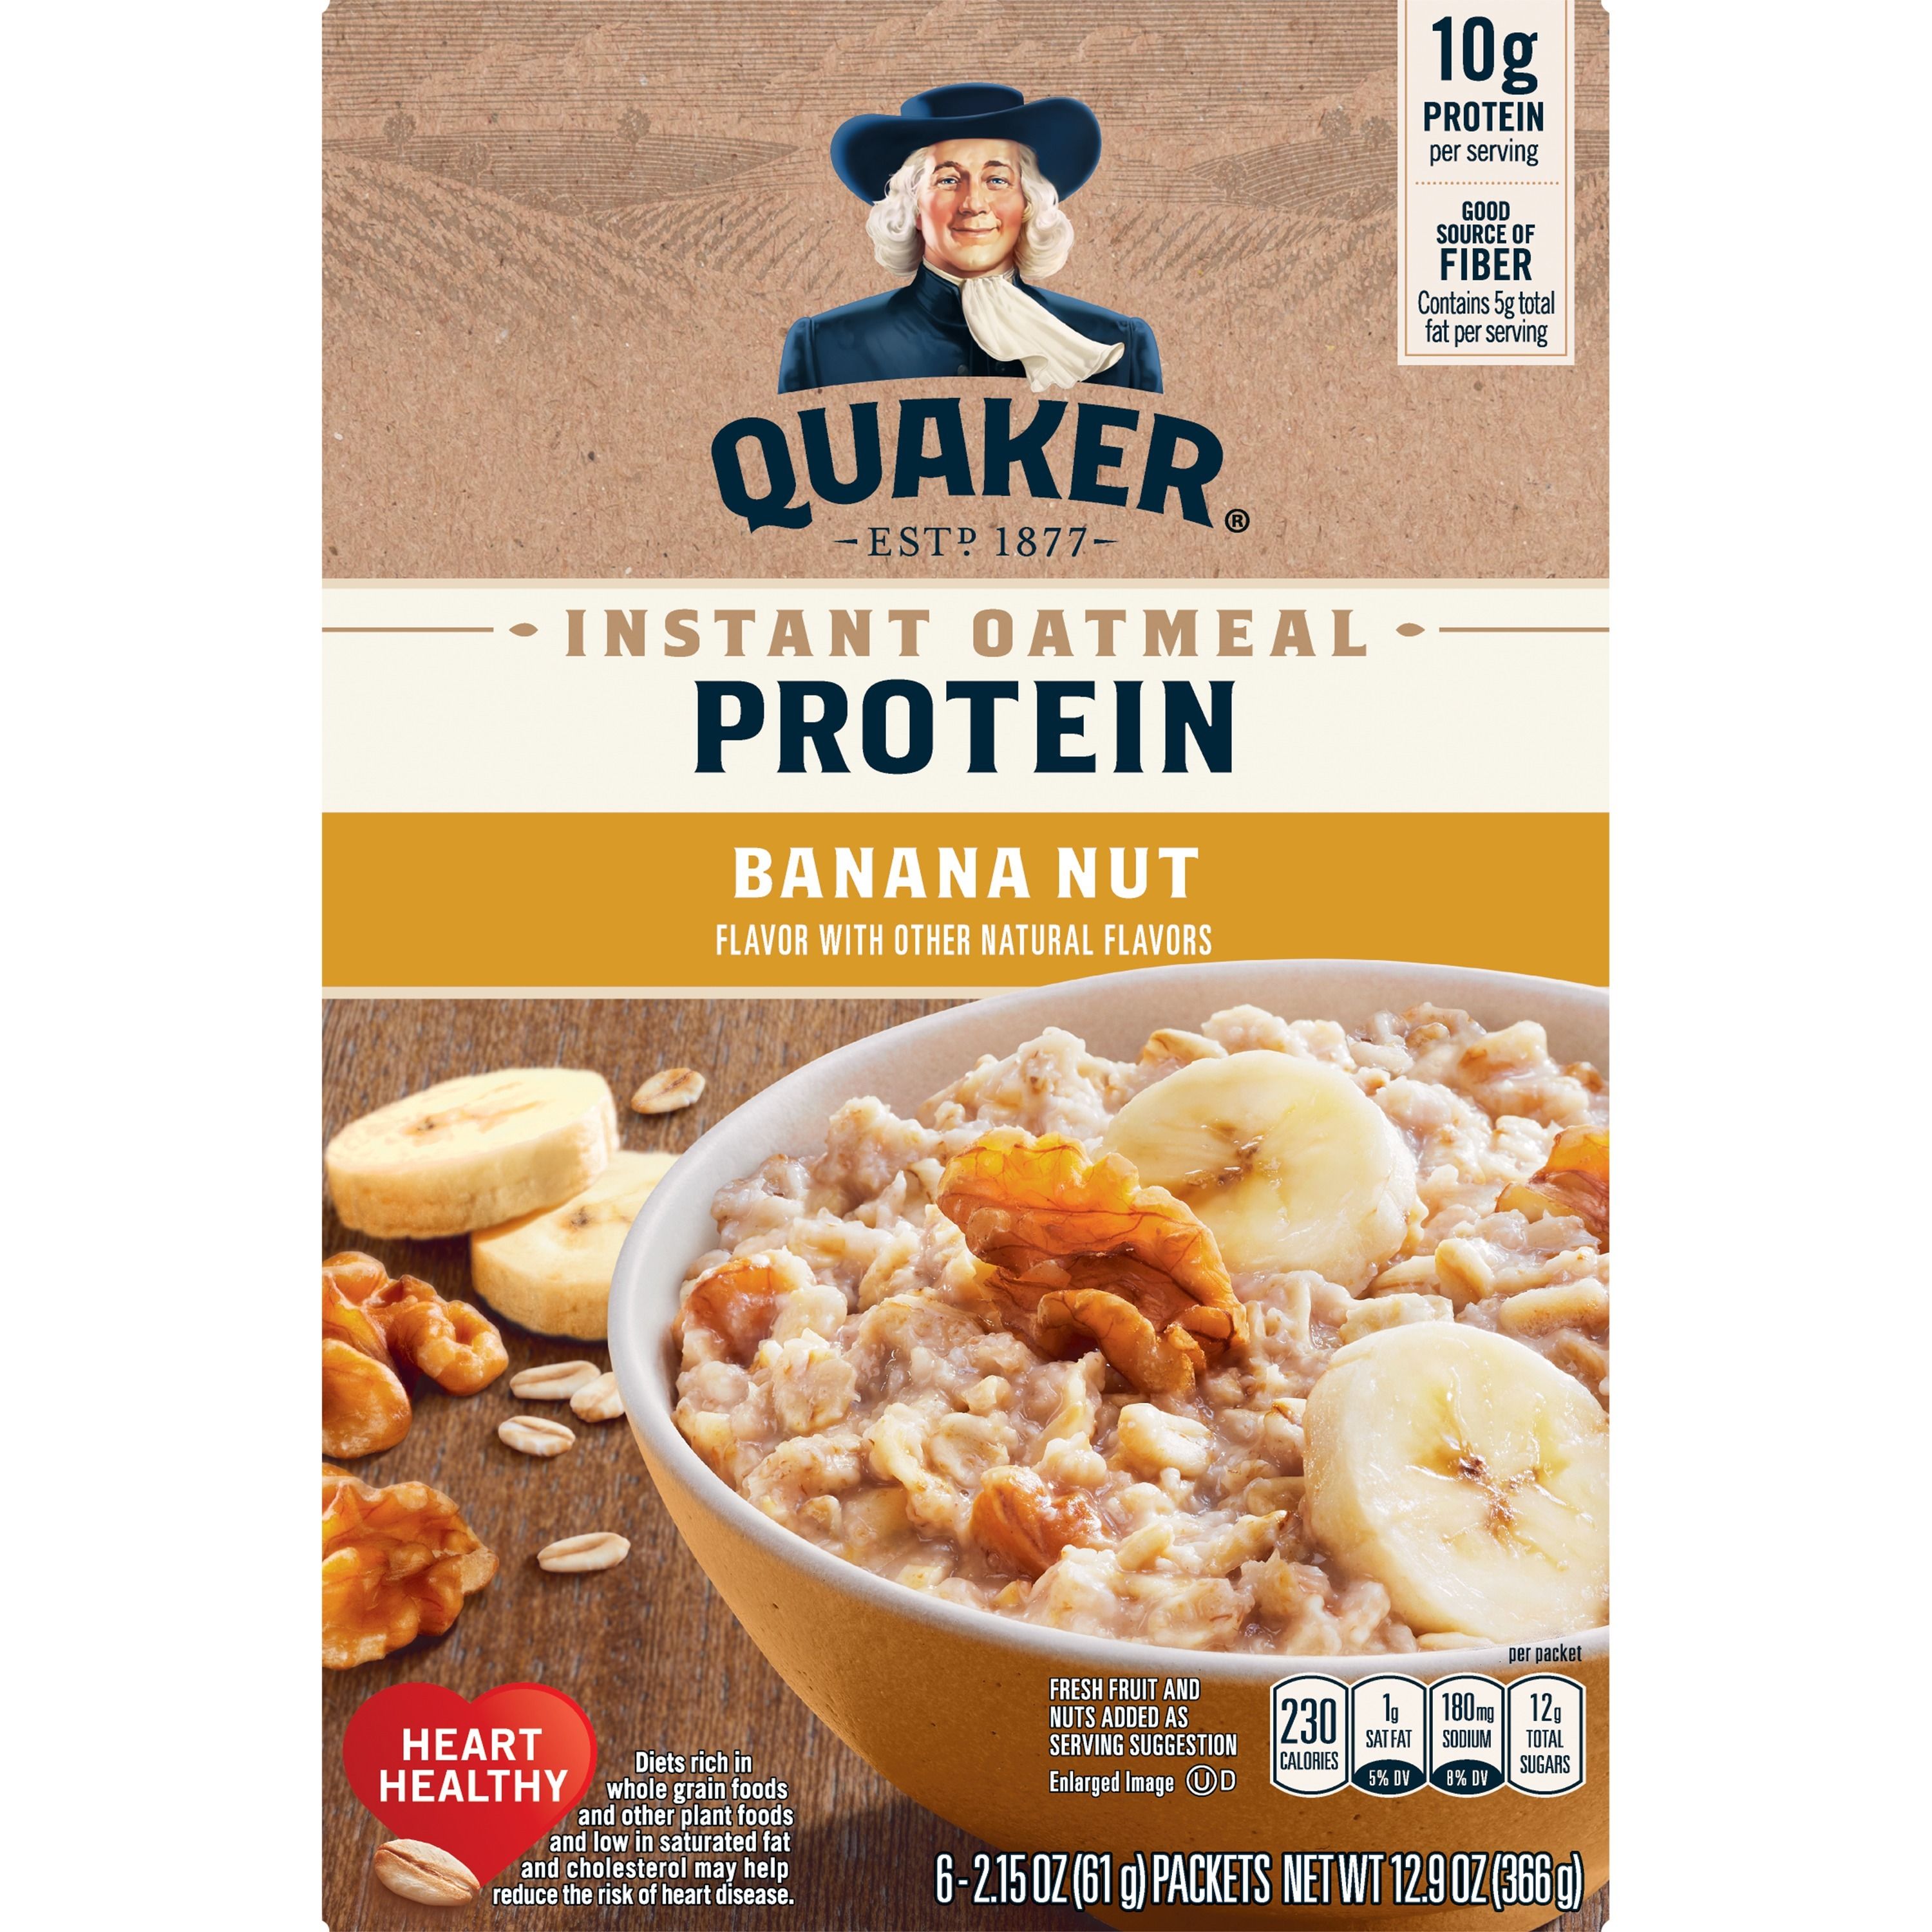 Quaker Protein Instant Oatmeal Banana Nut